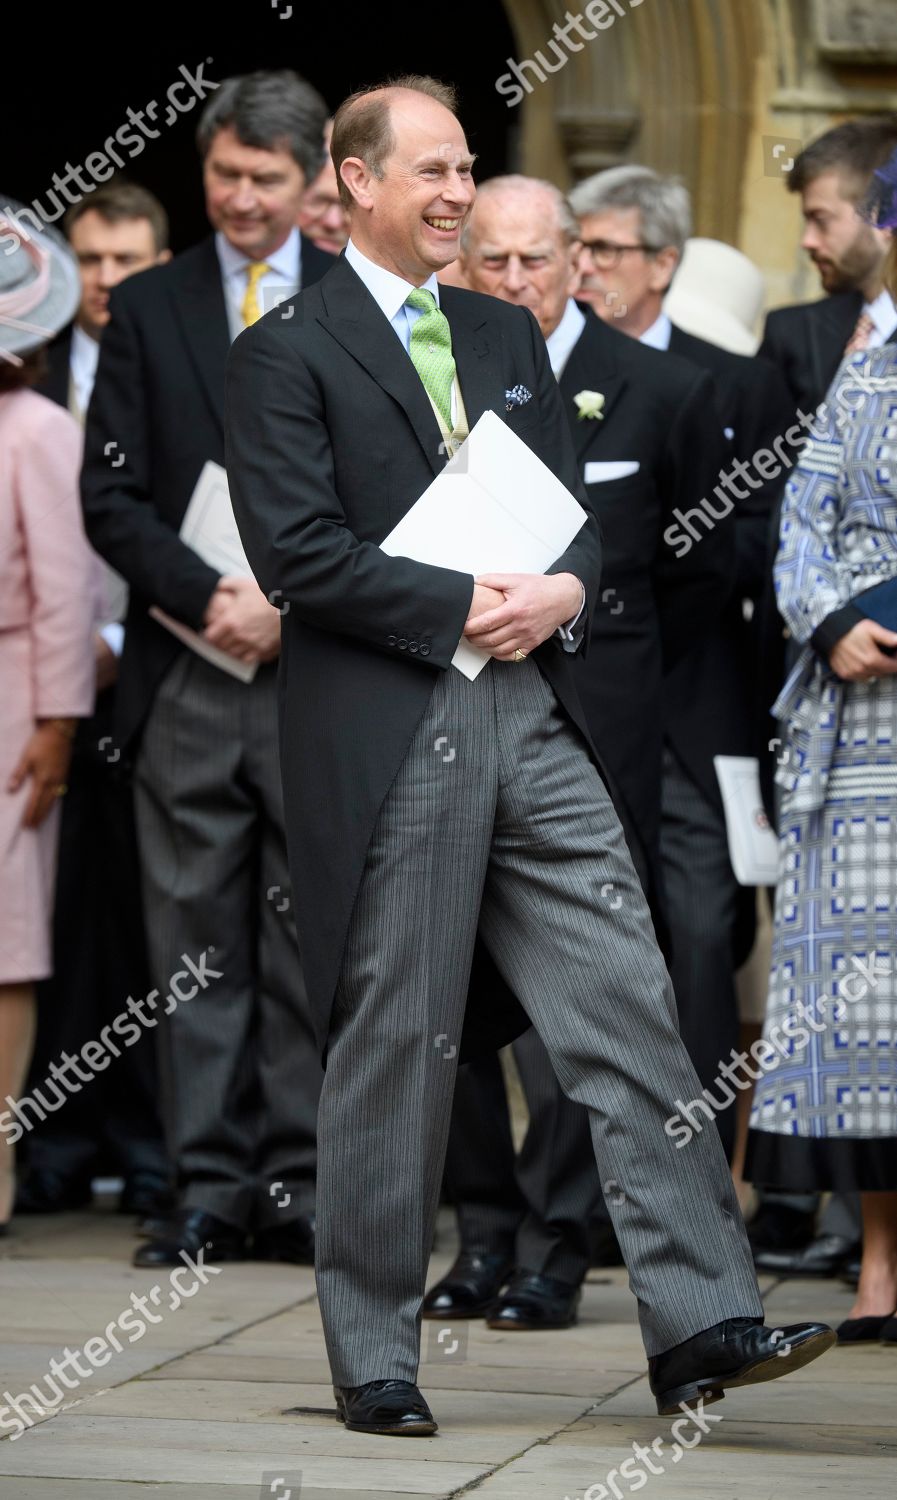 the-wedding-of-lady-gabriella-windsor-and-thomas-kingston-st-georges-chapel-windsor-castle-uk-shutterstock-editorial-10239423fe.jpg